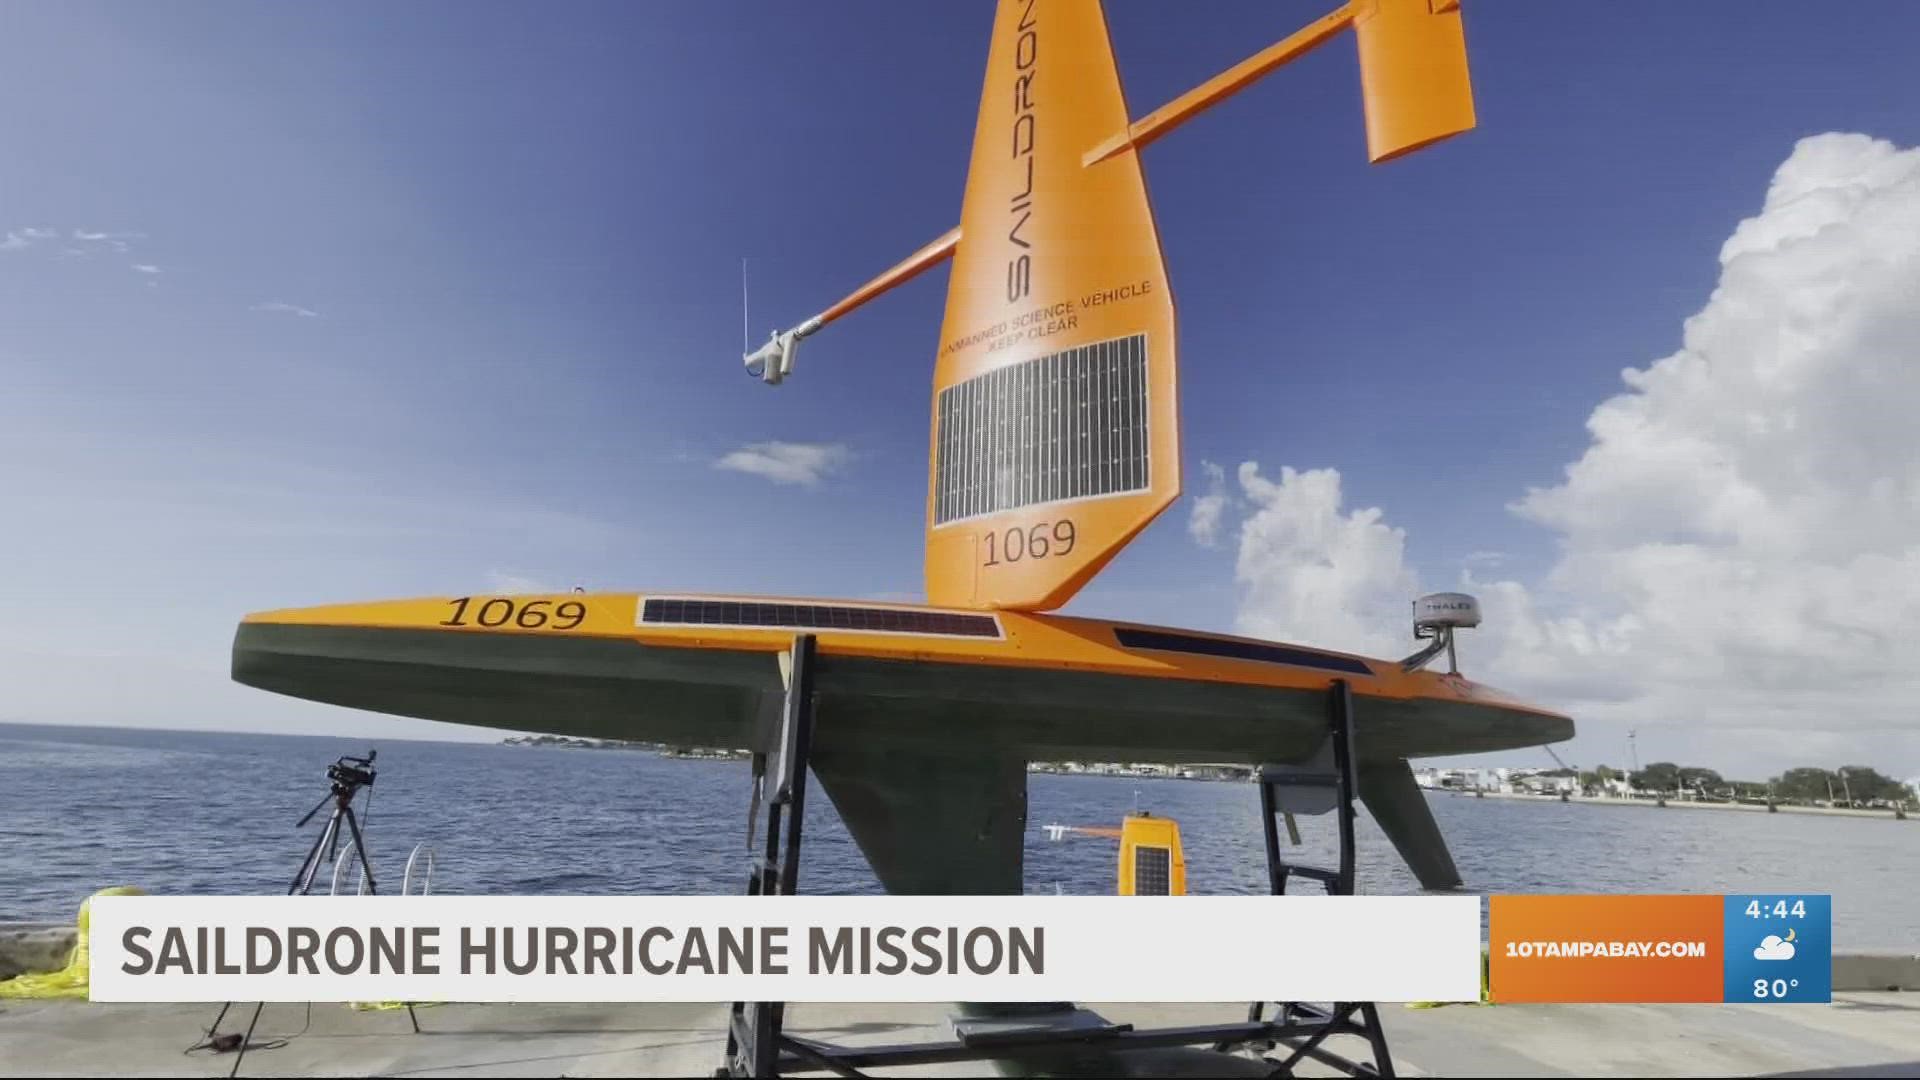 Saildrone launches second hurricane mission into Atlantic and Gulf of Mexico to gather critical hurricane data.